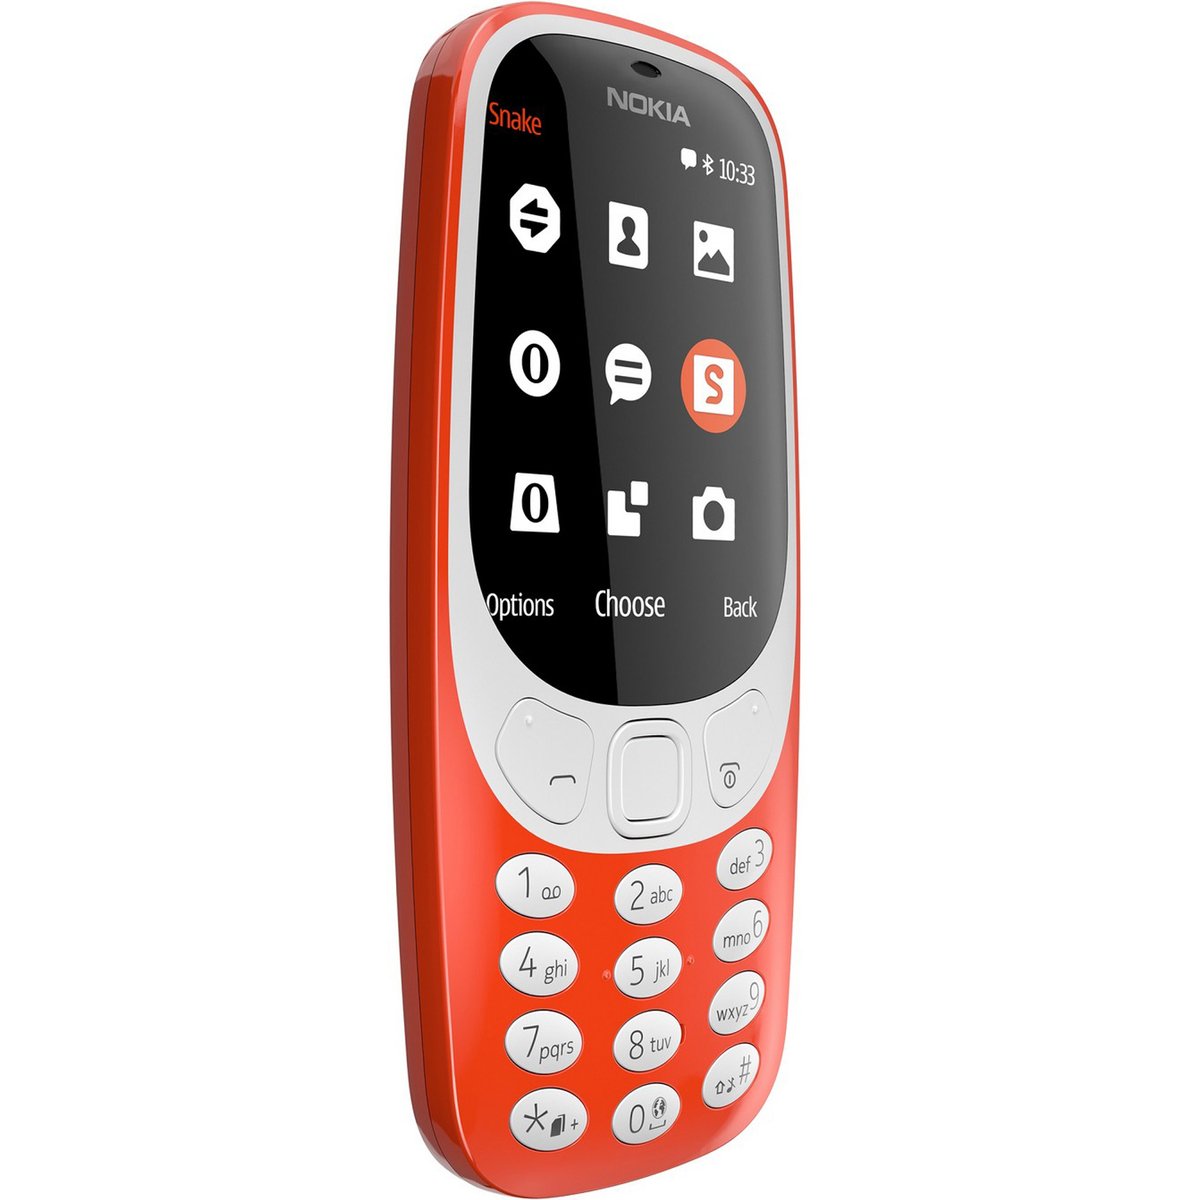 Nokia Featured Phone 3310 Red